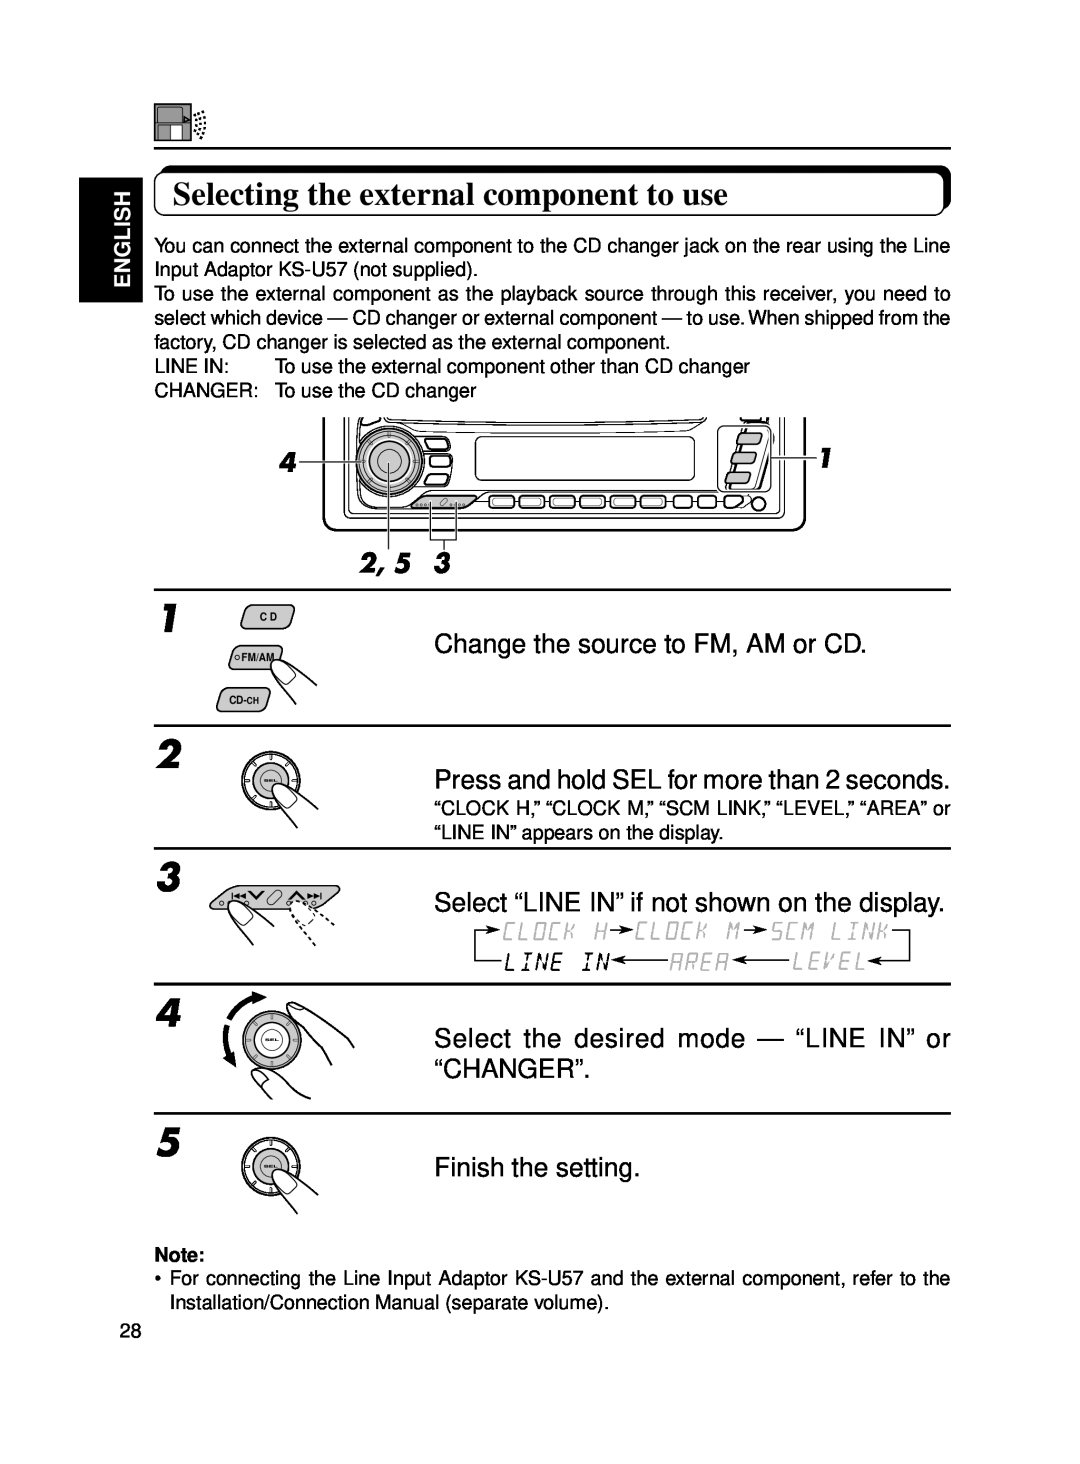 JVC KD-SX650 manual Selecting the external component to use, Change the source to FM, AM or CD, Finish the setting, English 